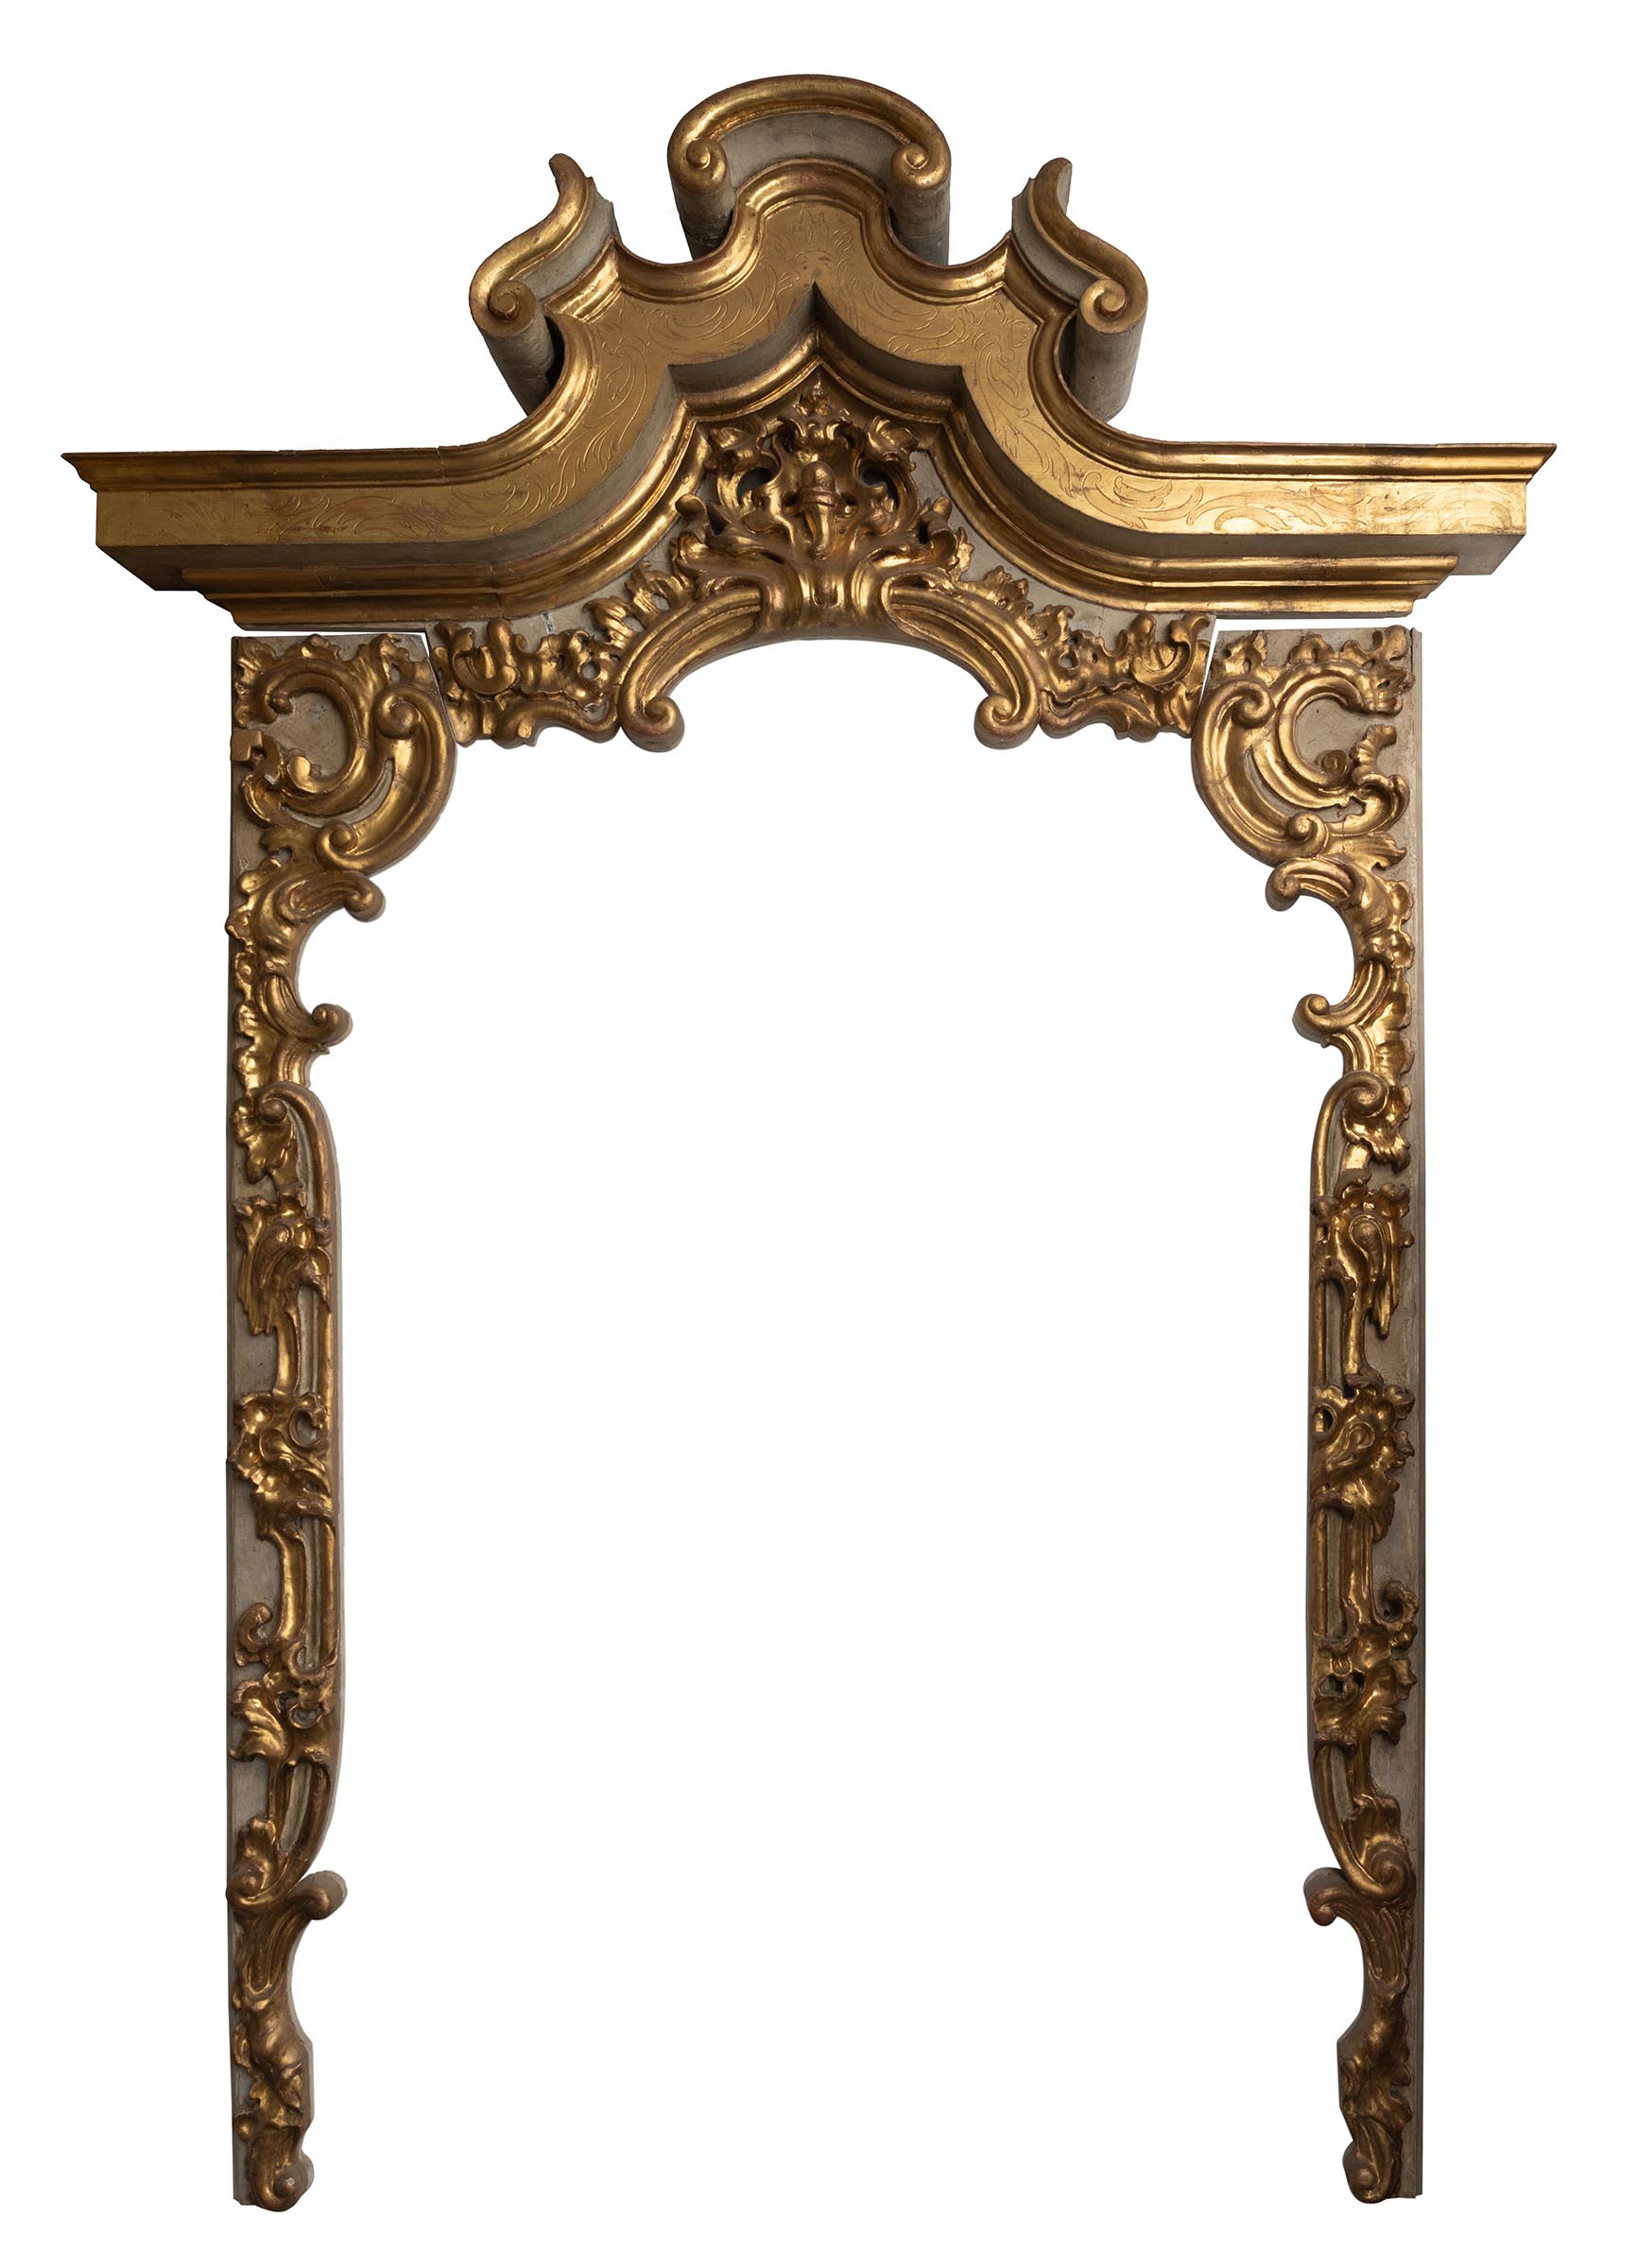 Baroque door frame. Andalusia, pps. 18th c.Carved, gilded and polychrome wood.Removable in three